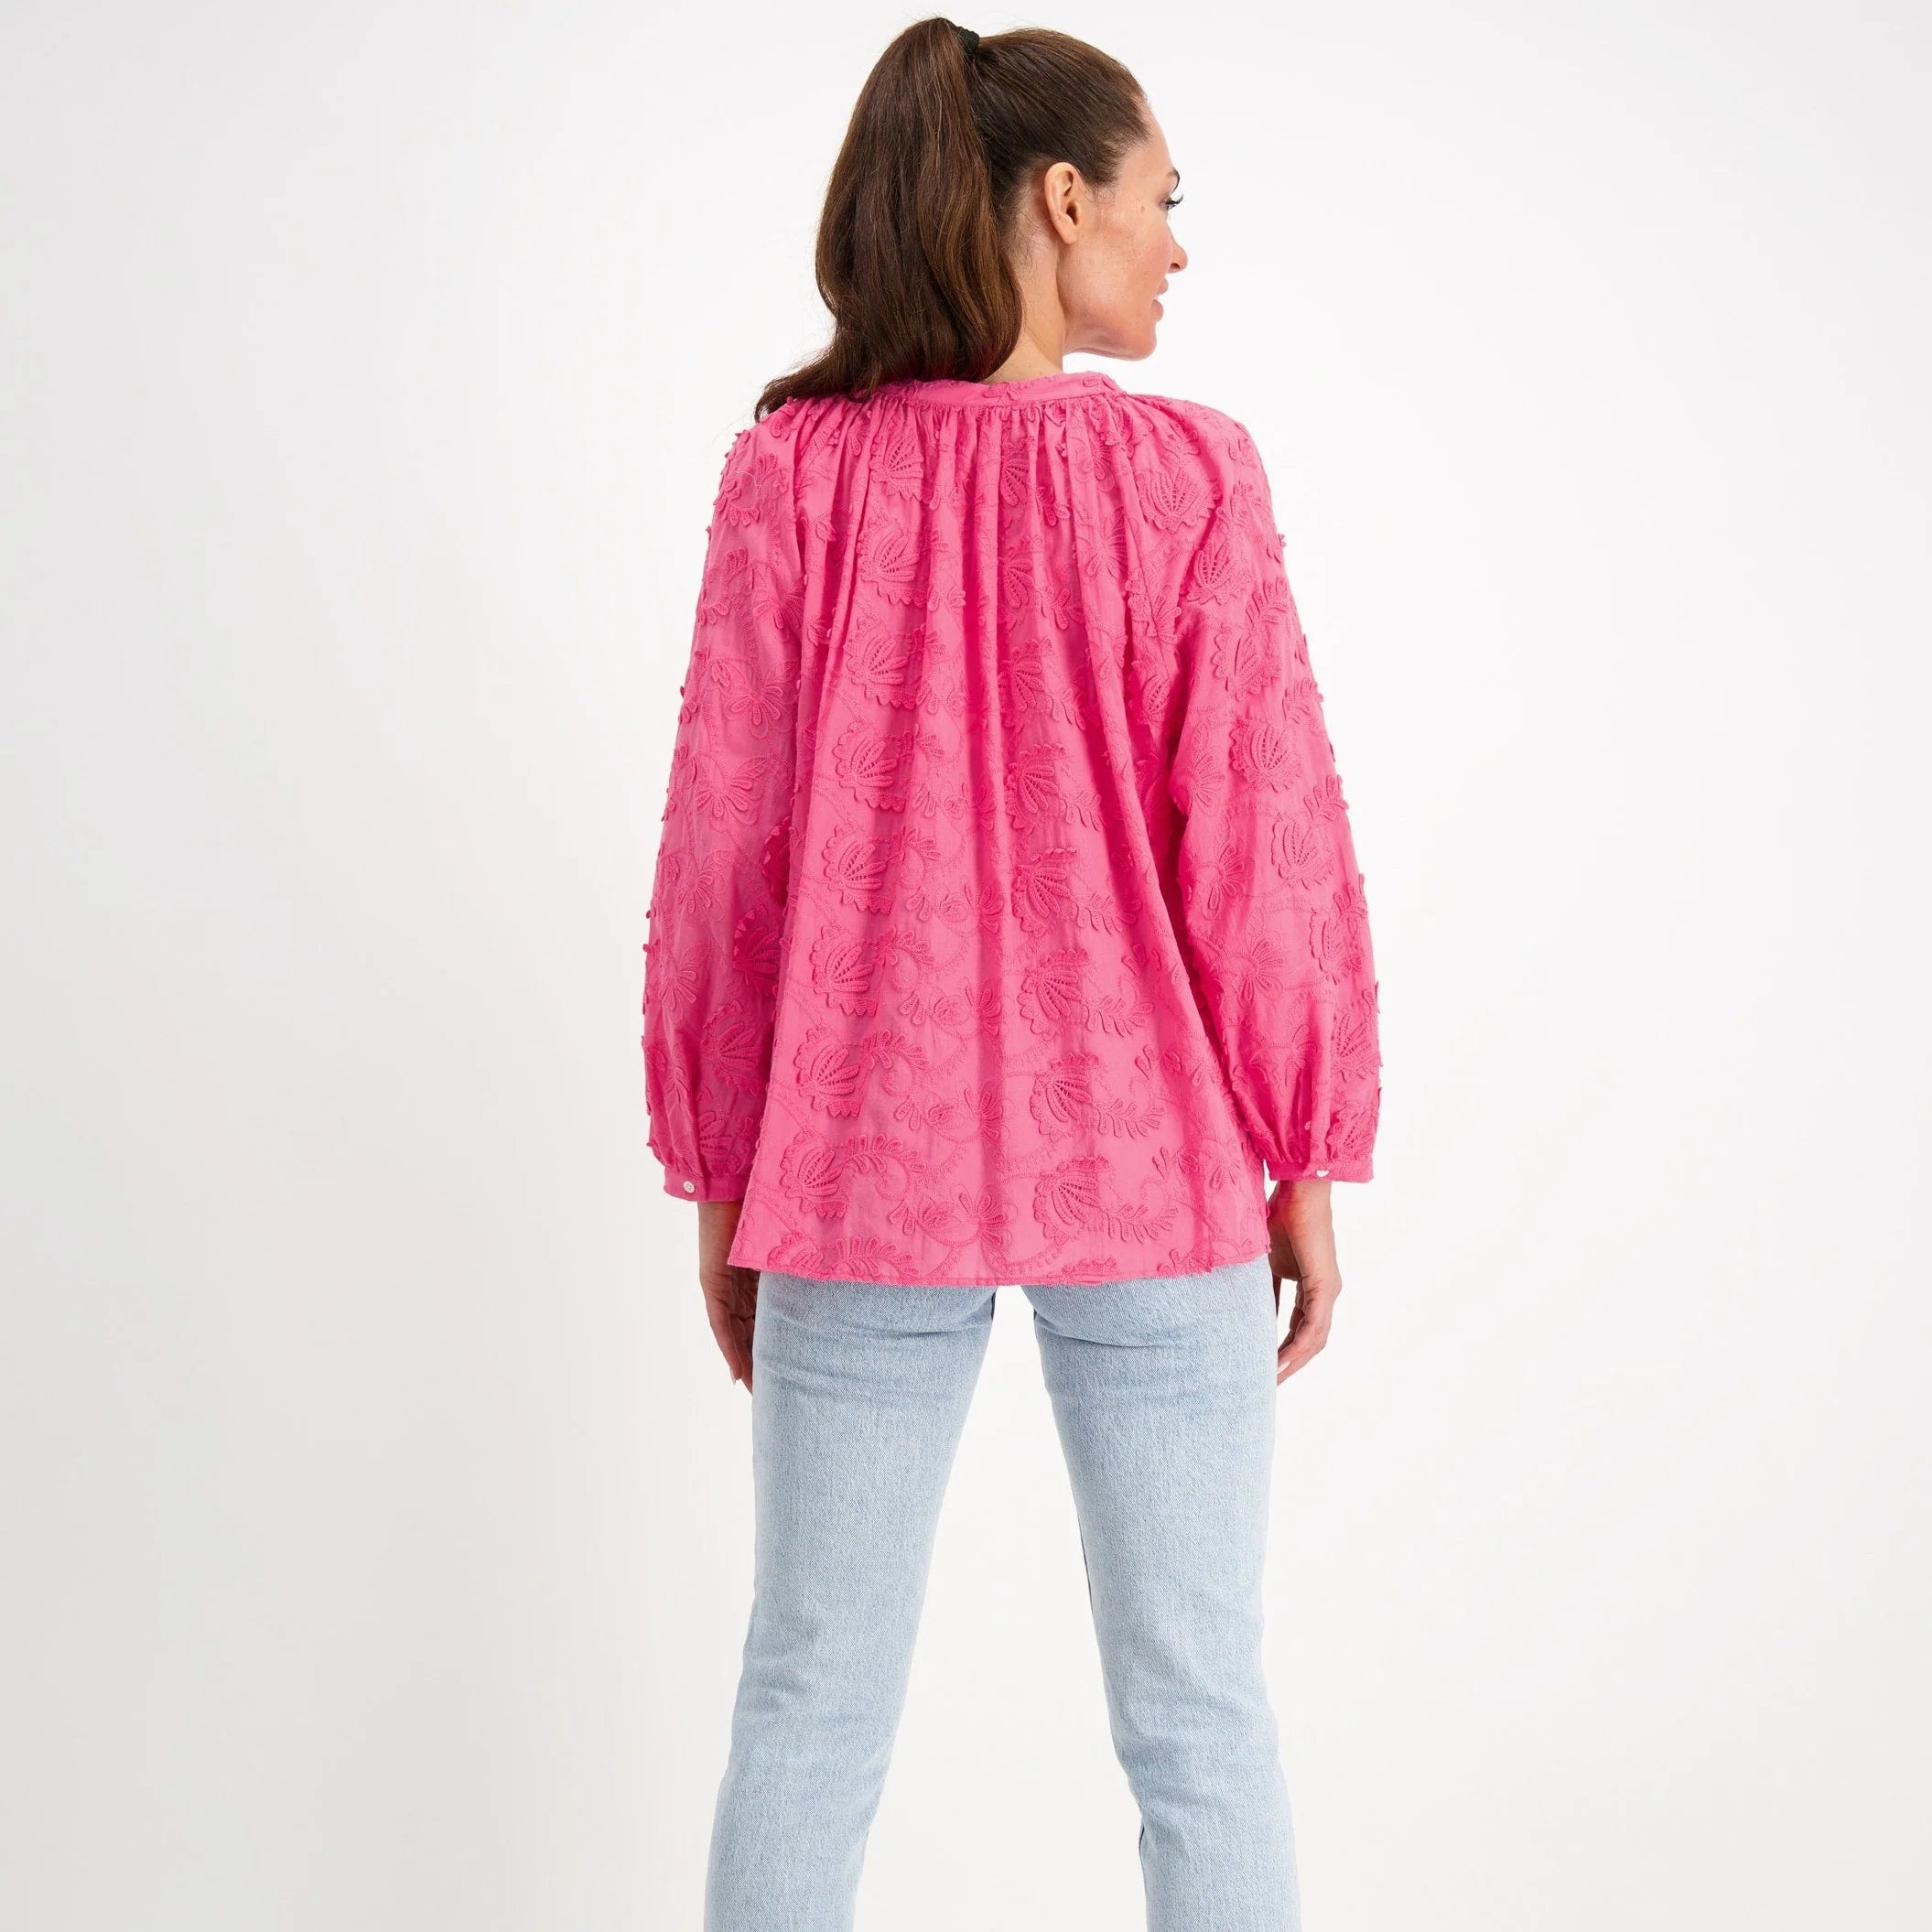 Sorority Pink Embroidered Cotton Blouse/Shirt